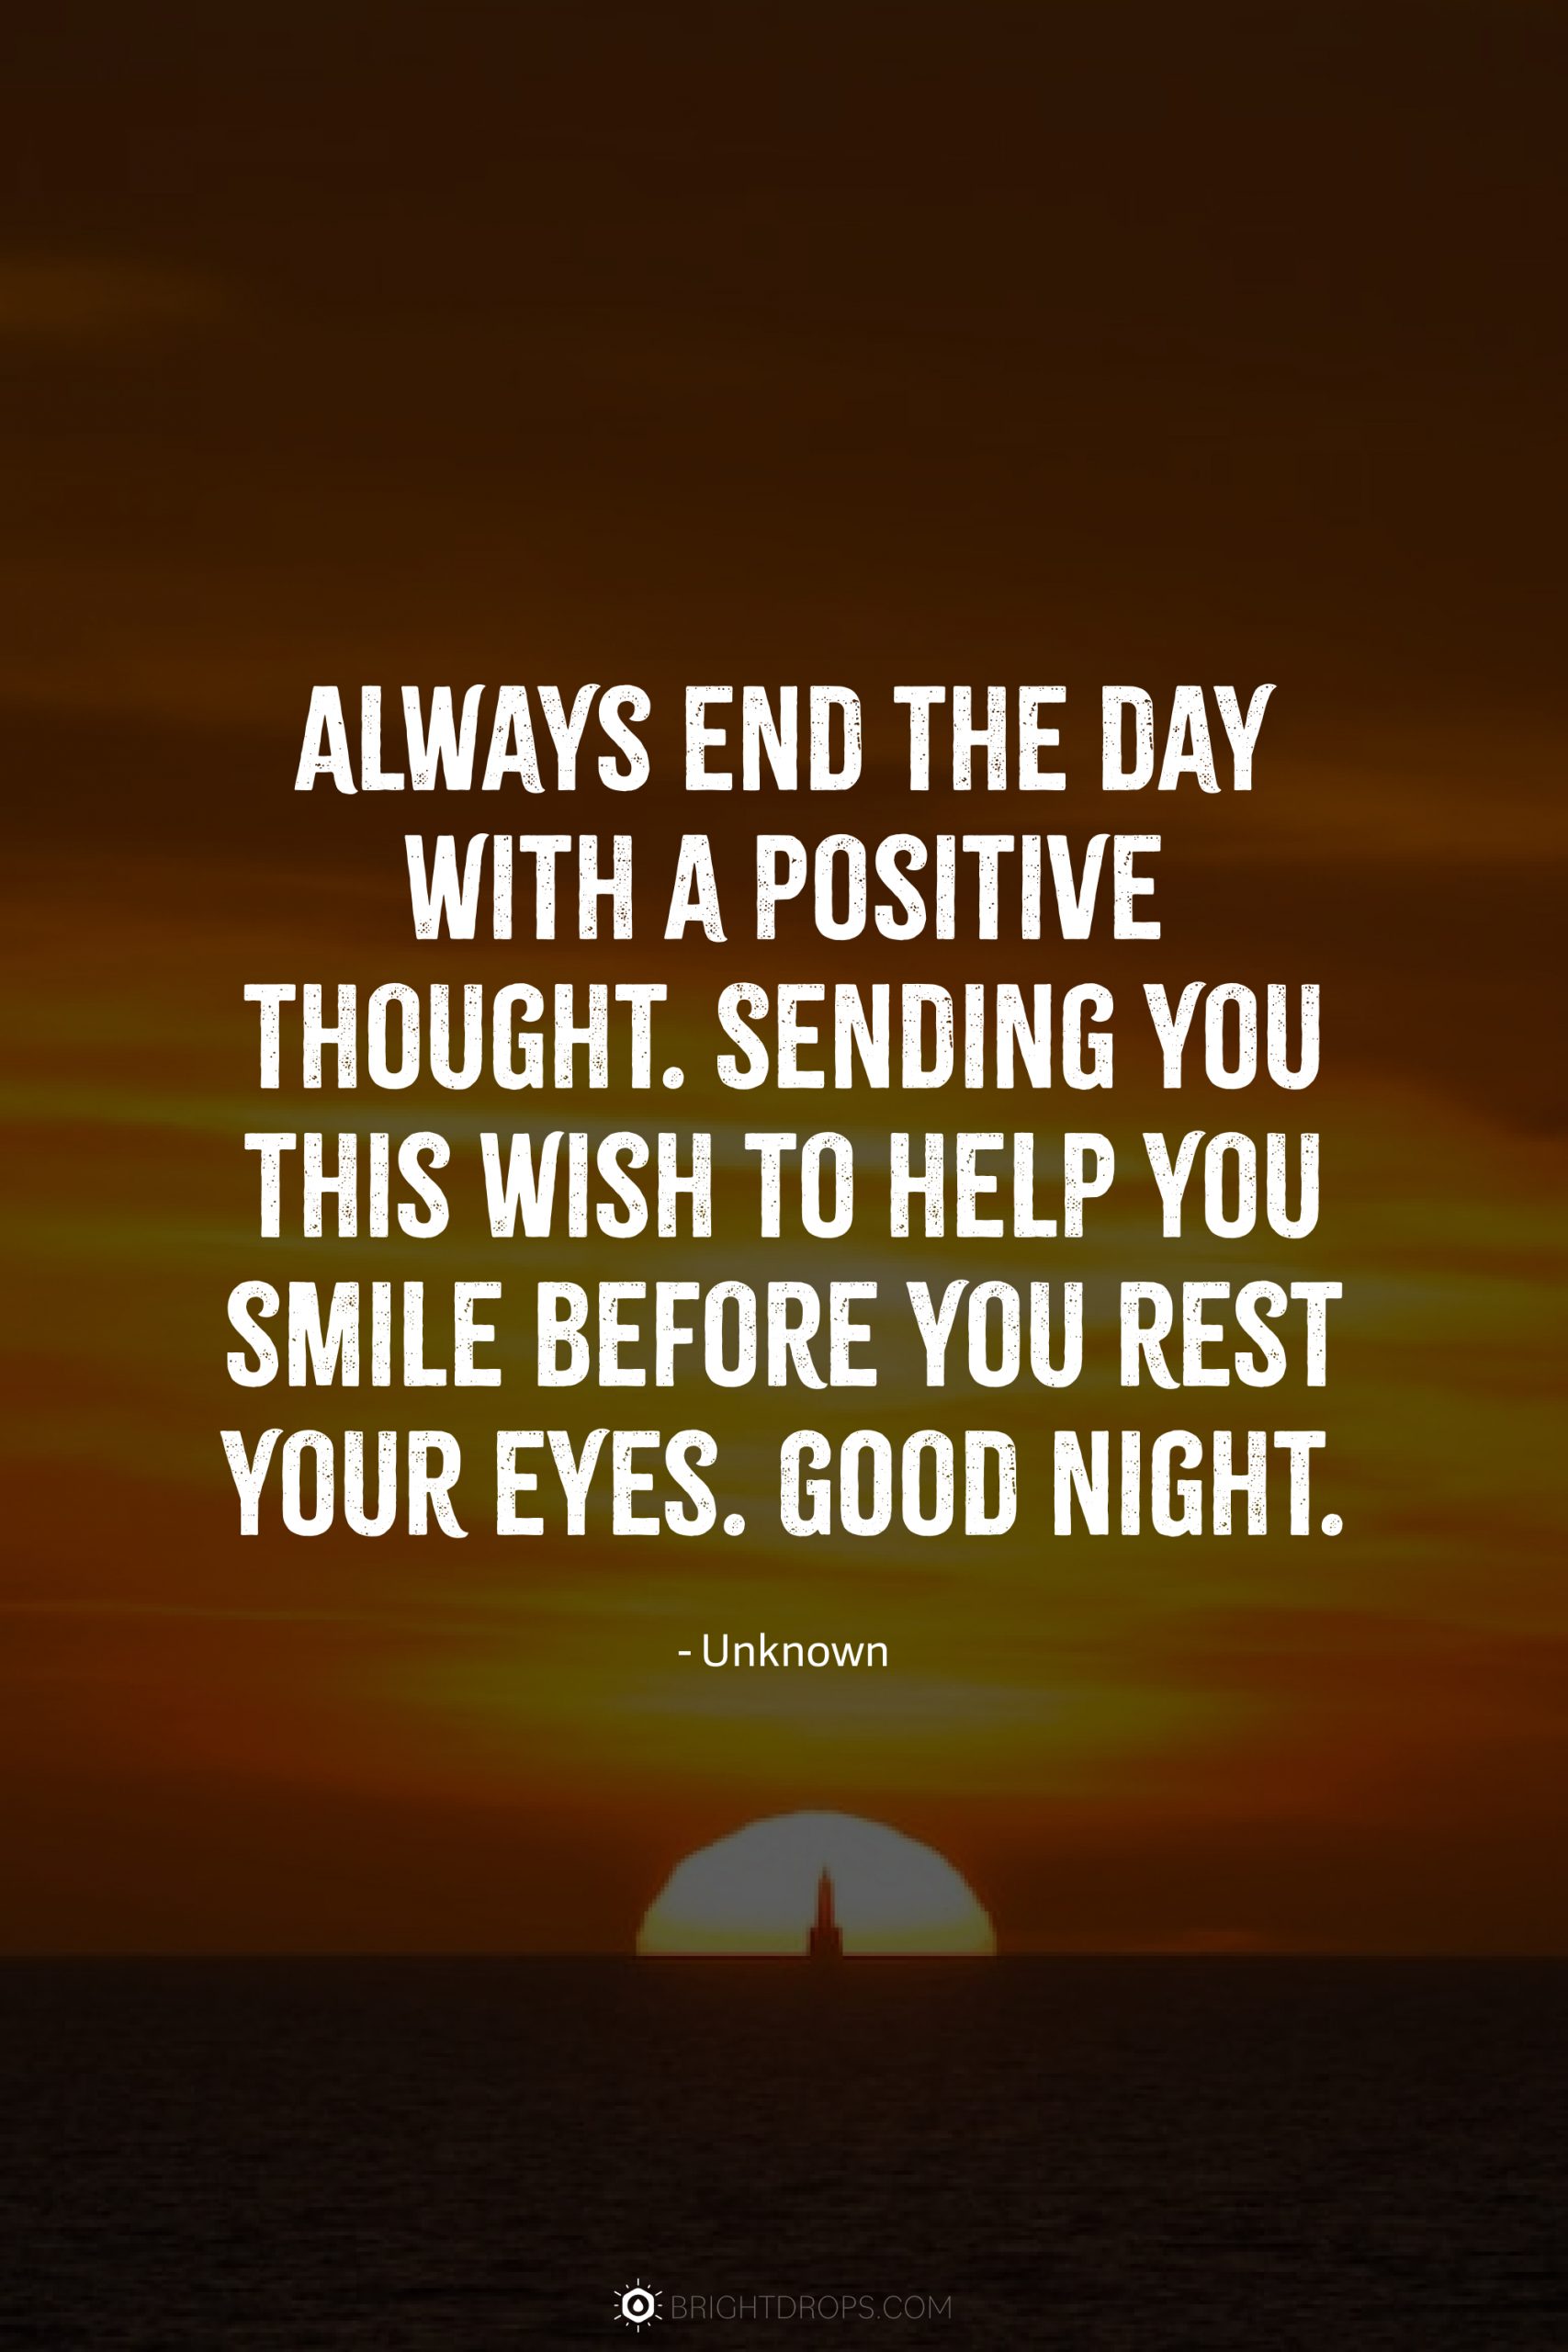 Always end the day with a positive thought. Sending you this wish to help you smile before you rest your eyes. Good night.